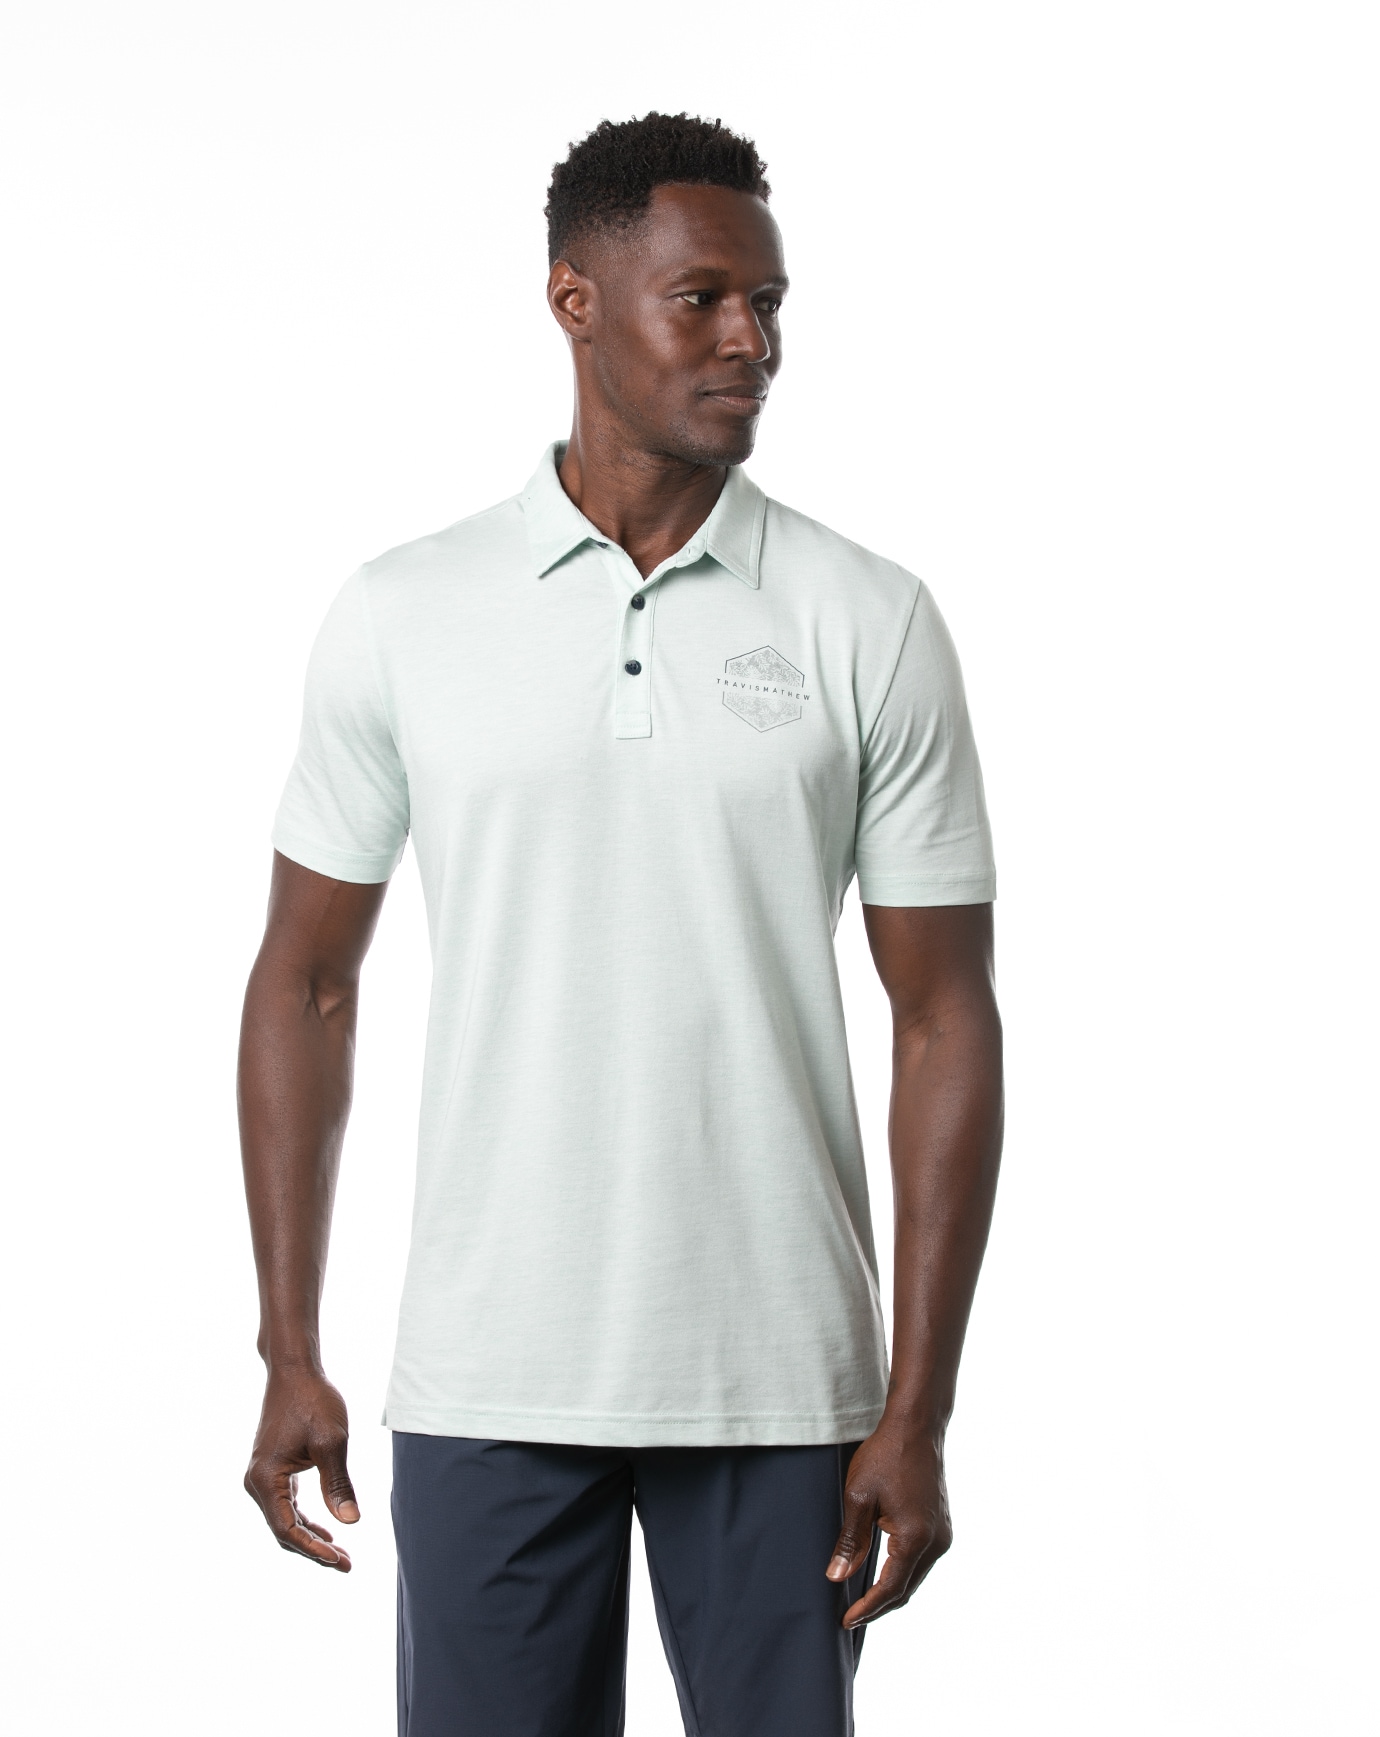 Related Product - SUN RAYS POLO